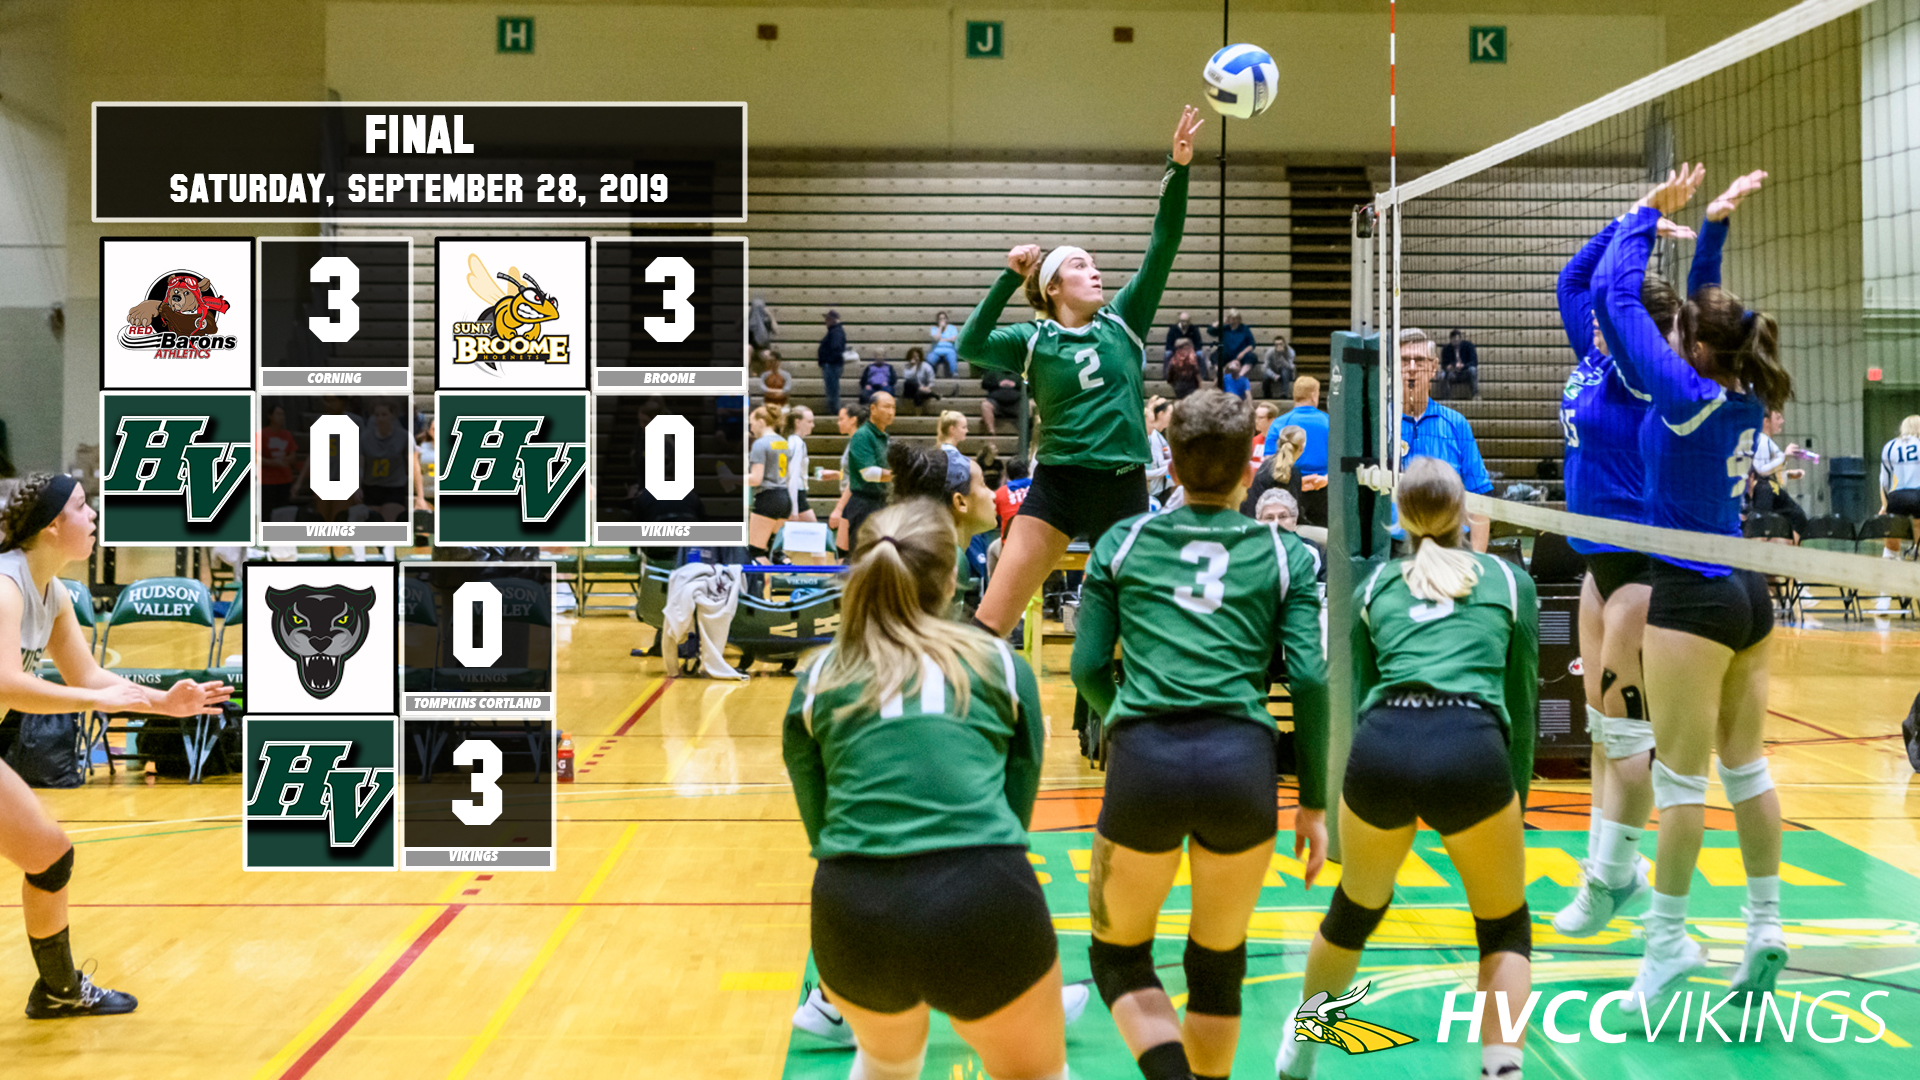 Volleyball defeated Tompkins Cortland 3-0 at Broome Pod on 9.28.19.